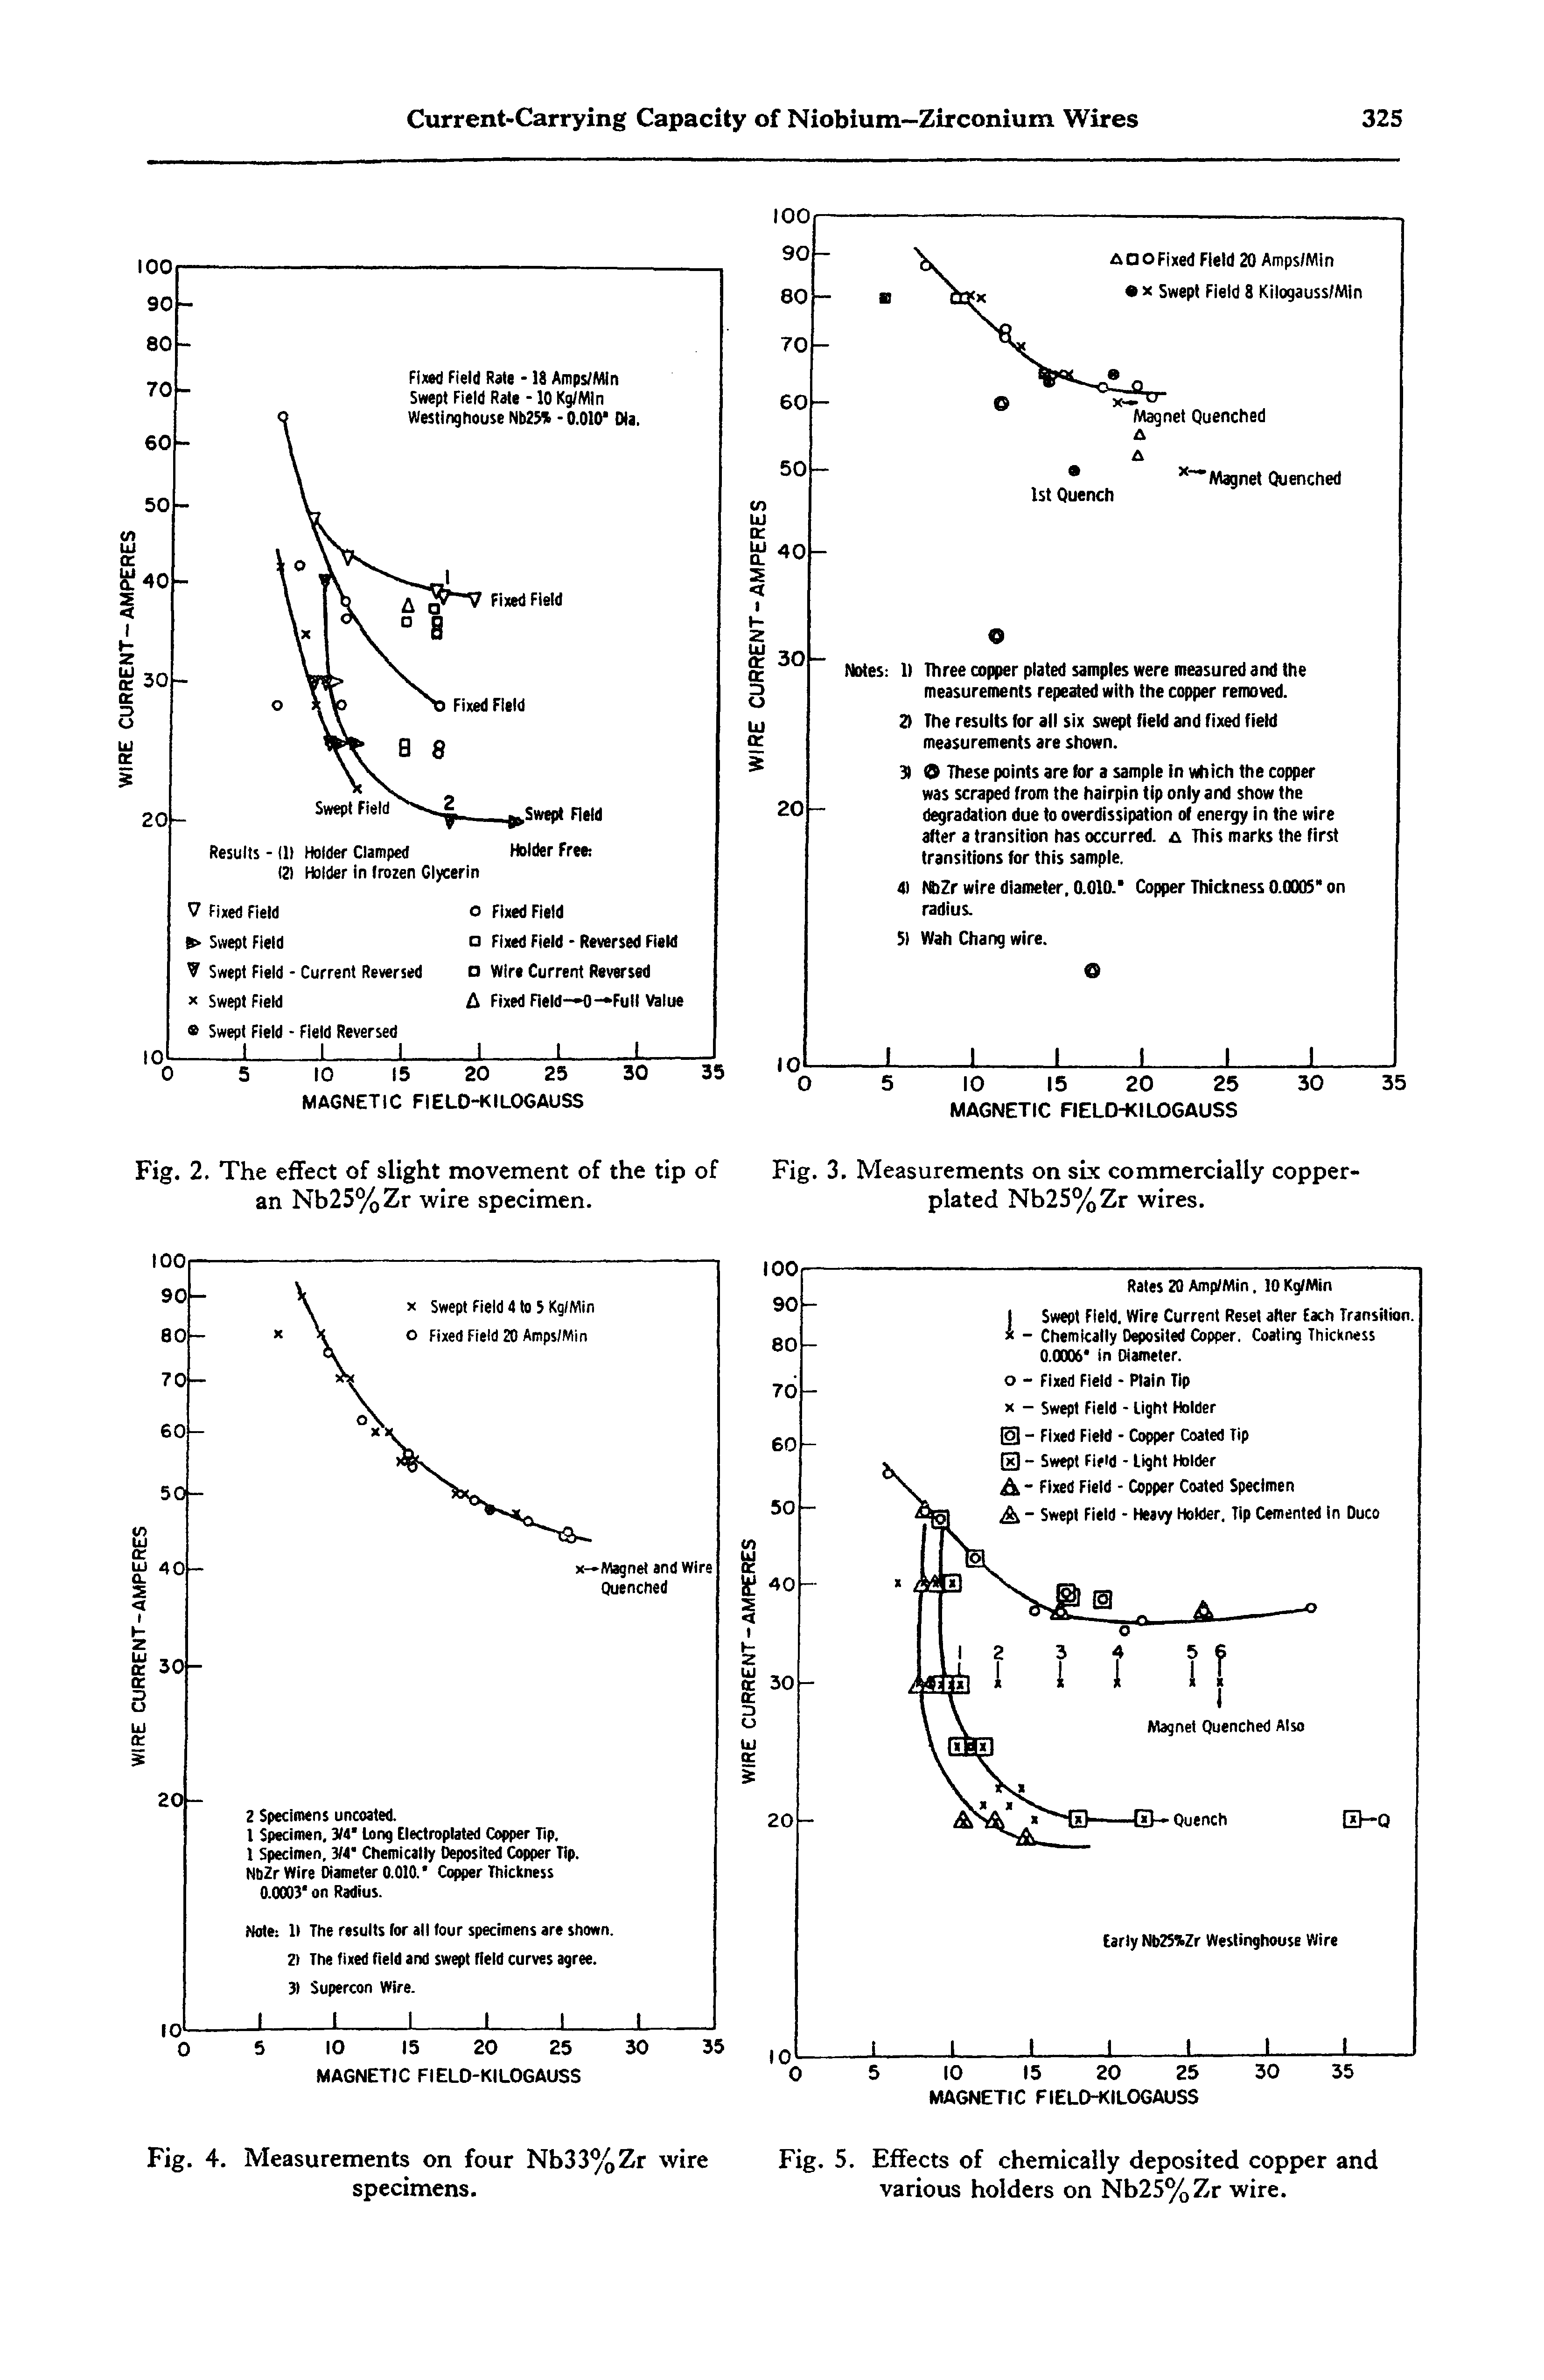 Fig. 5. Effects of chemically deposited copper and various holders on Nb25%Zr wire.